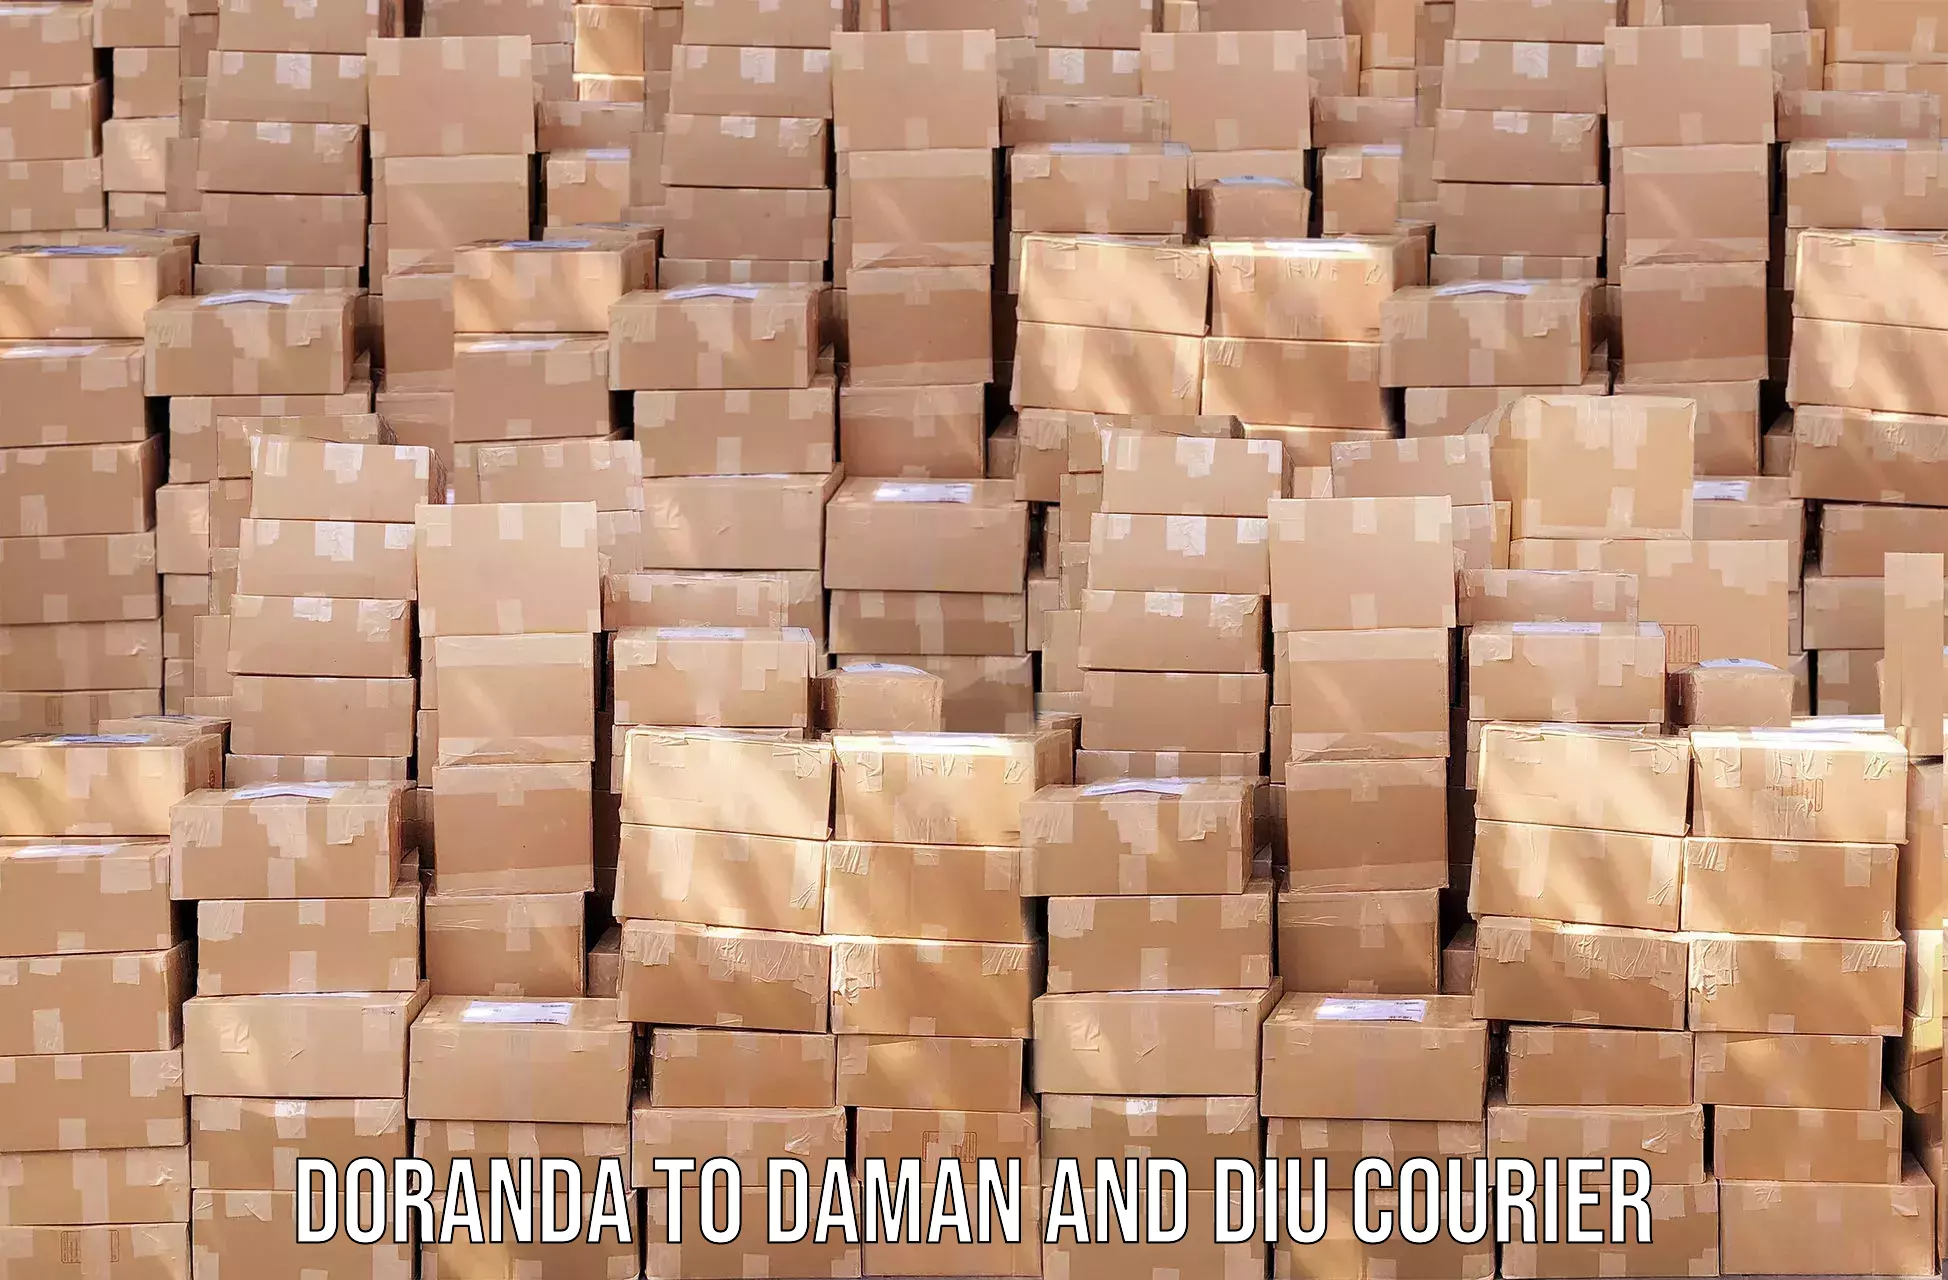 Sustainable delivery practices Doranda to Daman and Diu